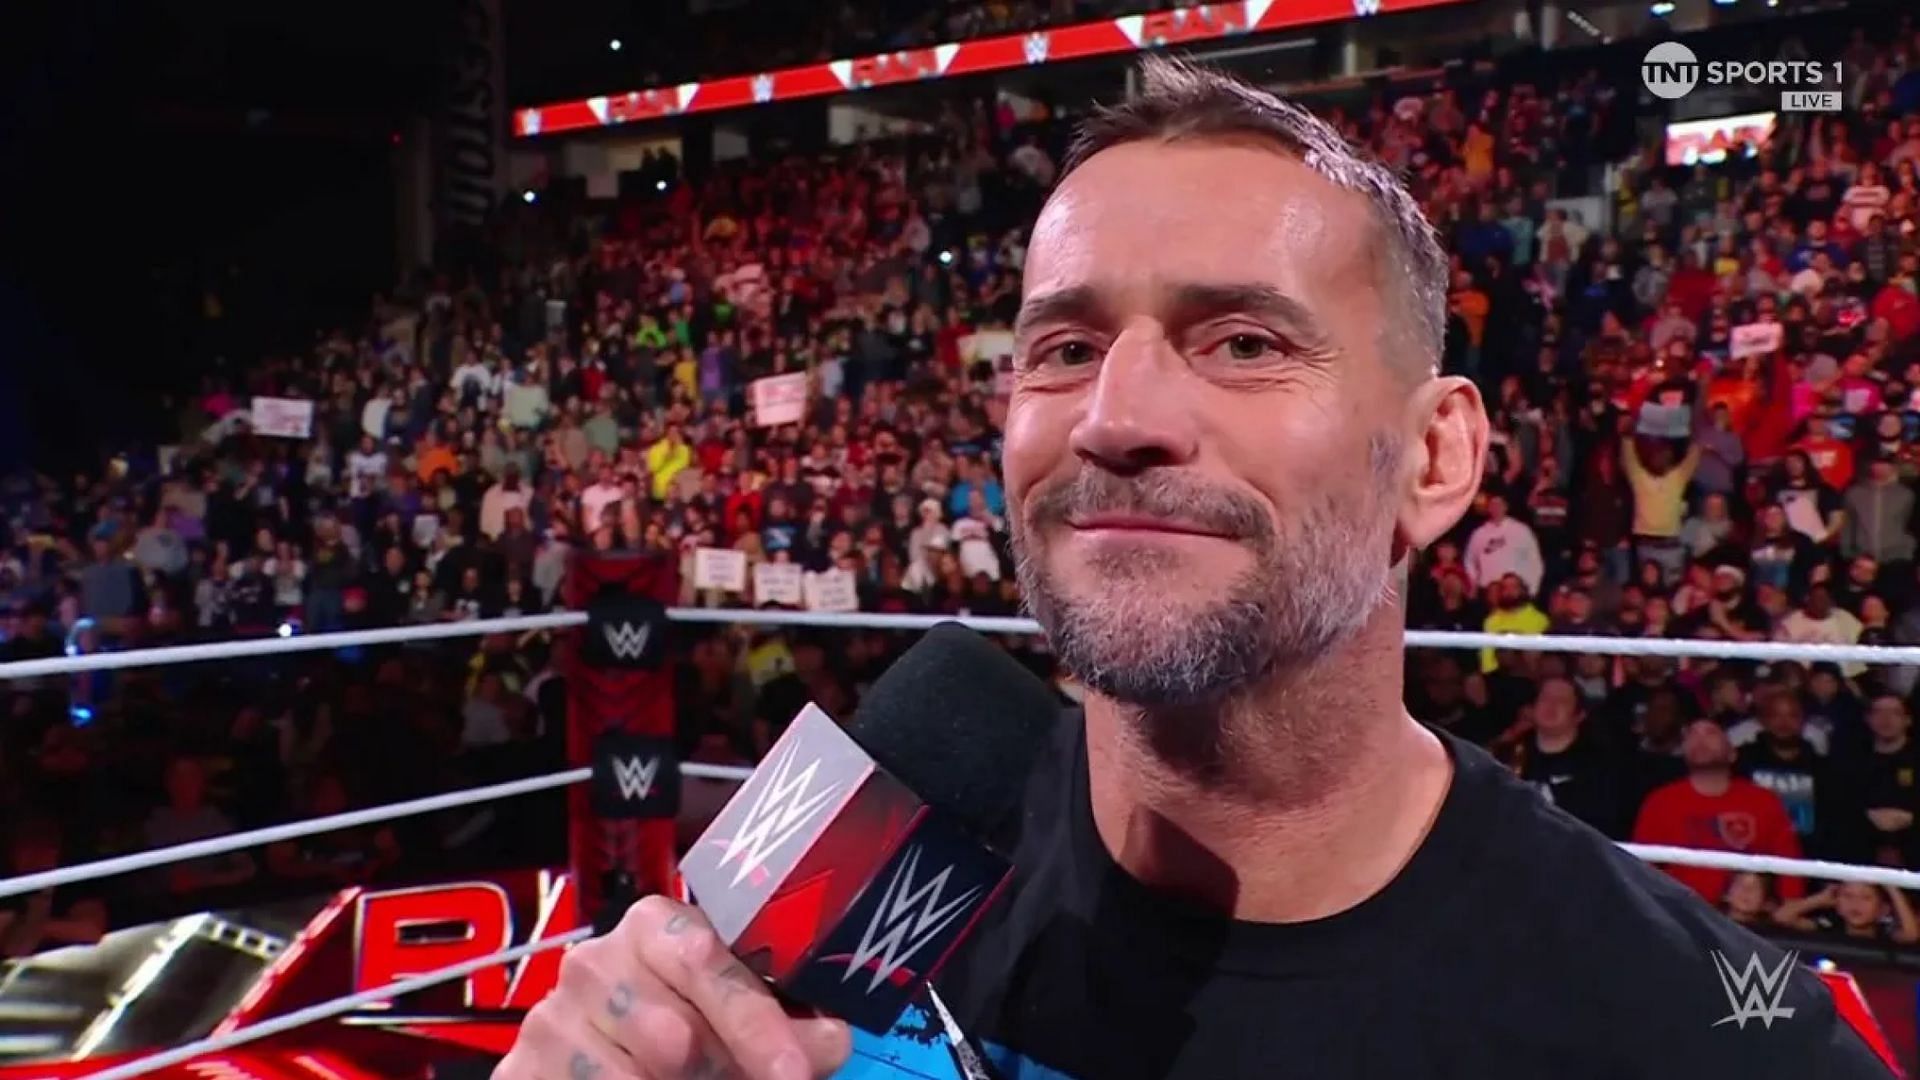 Did CM Punk pull some strings to get this star back into WWE?